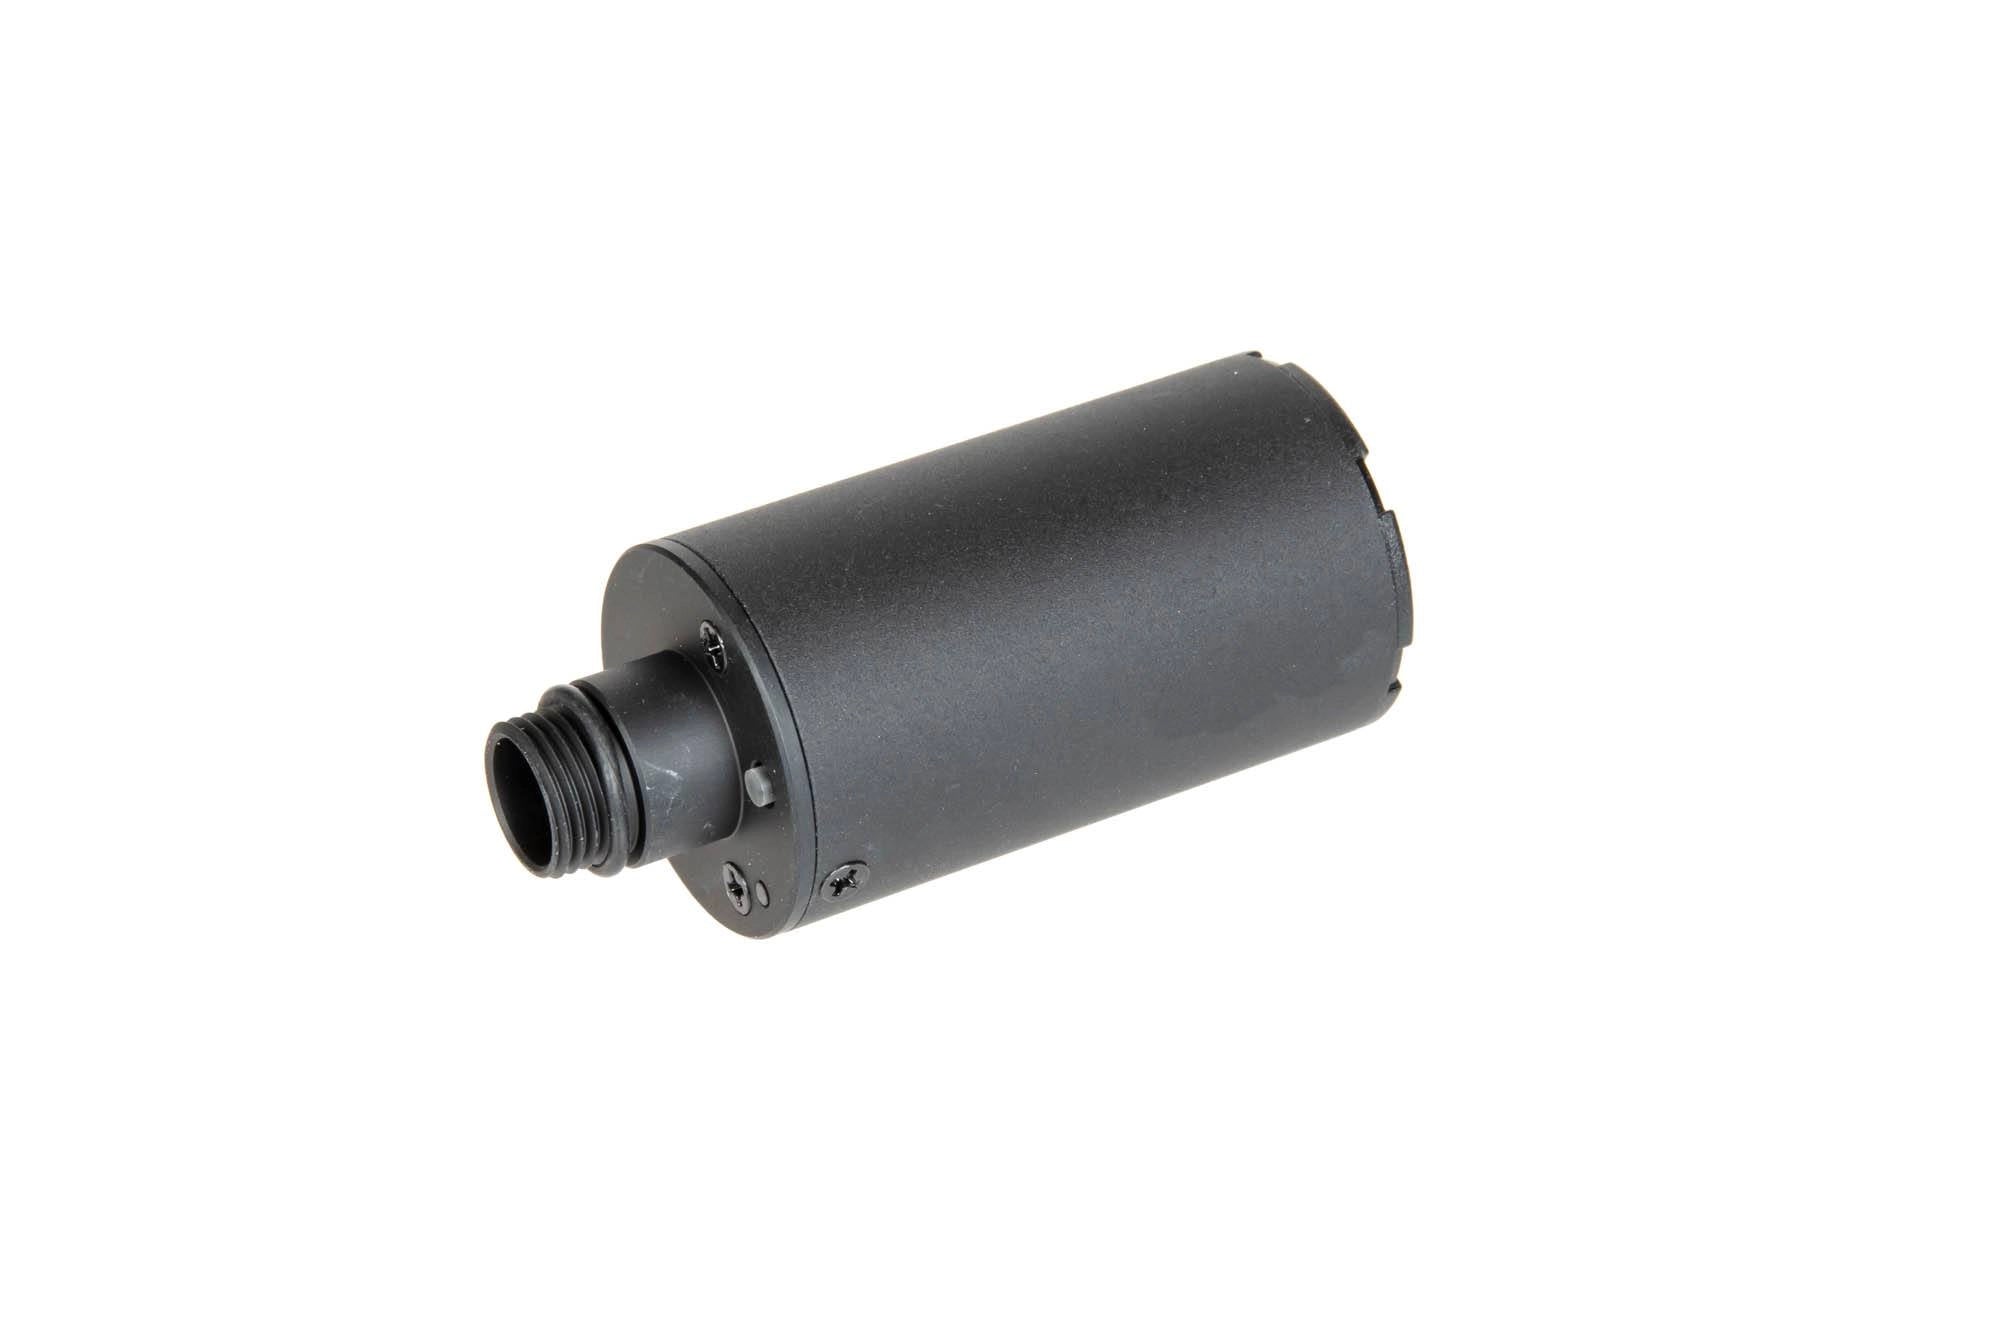 Tracer XT301 Compact MK2 silencer (for red pellets)